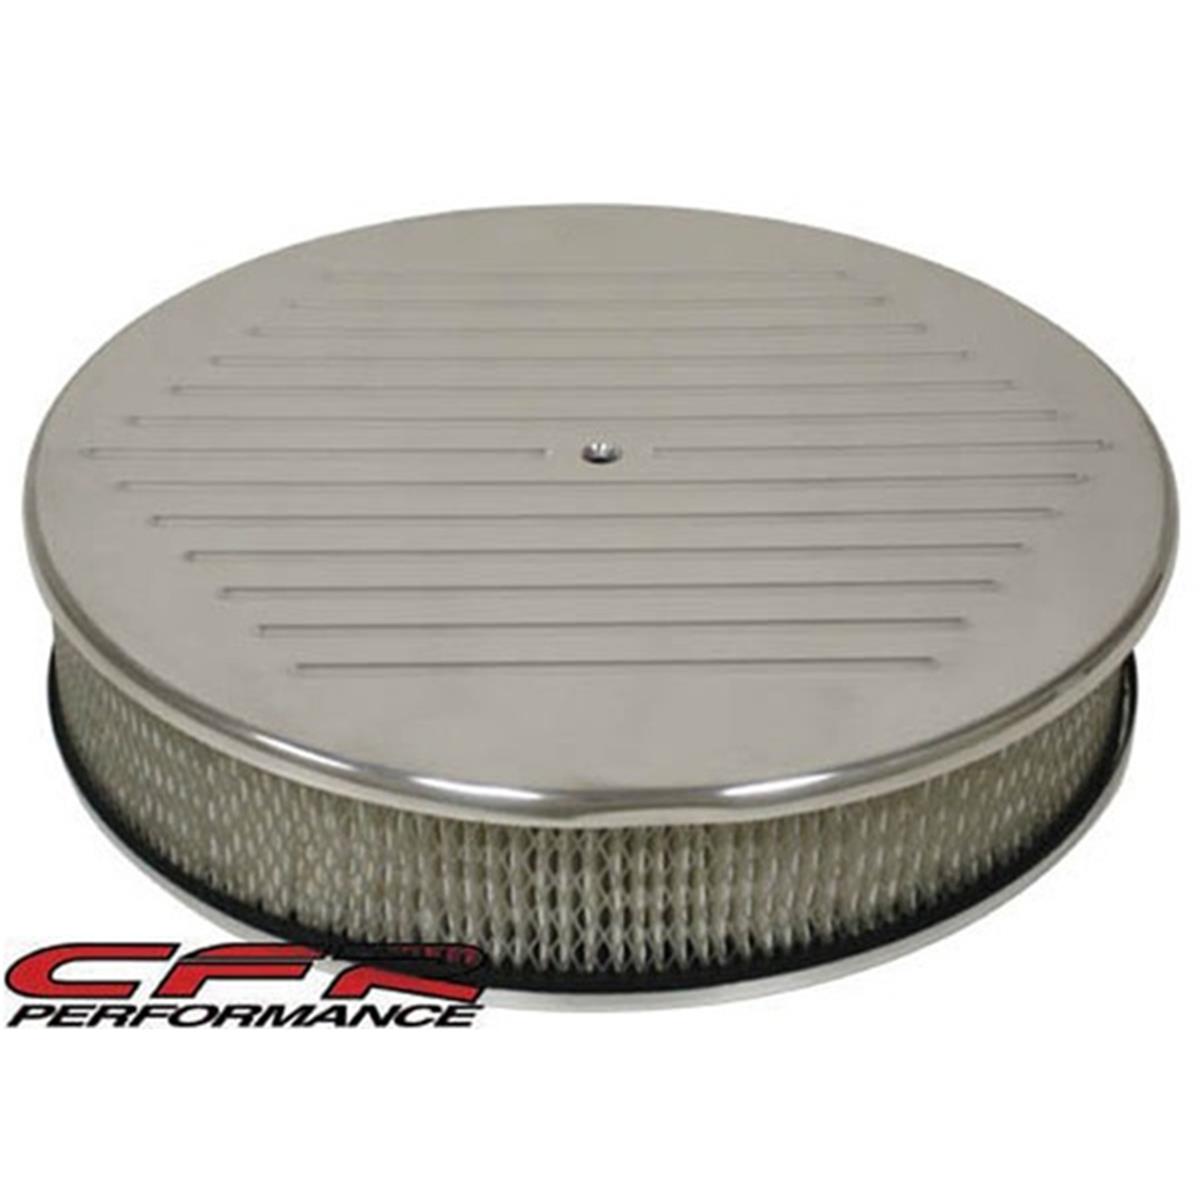 CFR HZ-6801-1-POL 14 in. Round Polished Aluminum Air Cleaner Ball Milled - Chevy, Ford & Mopar -  CFR Performance